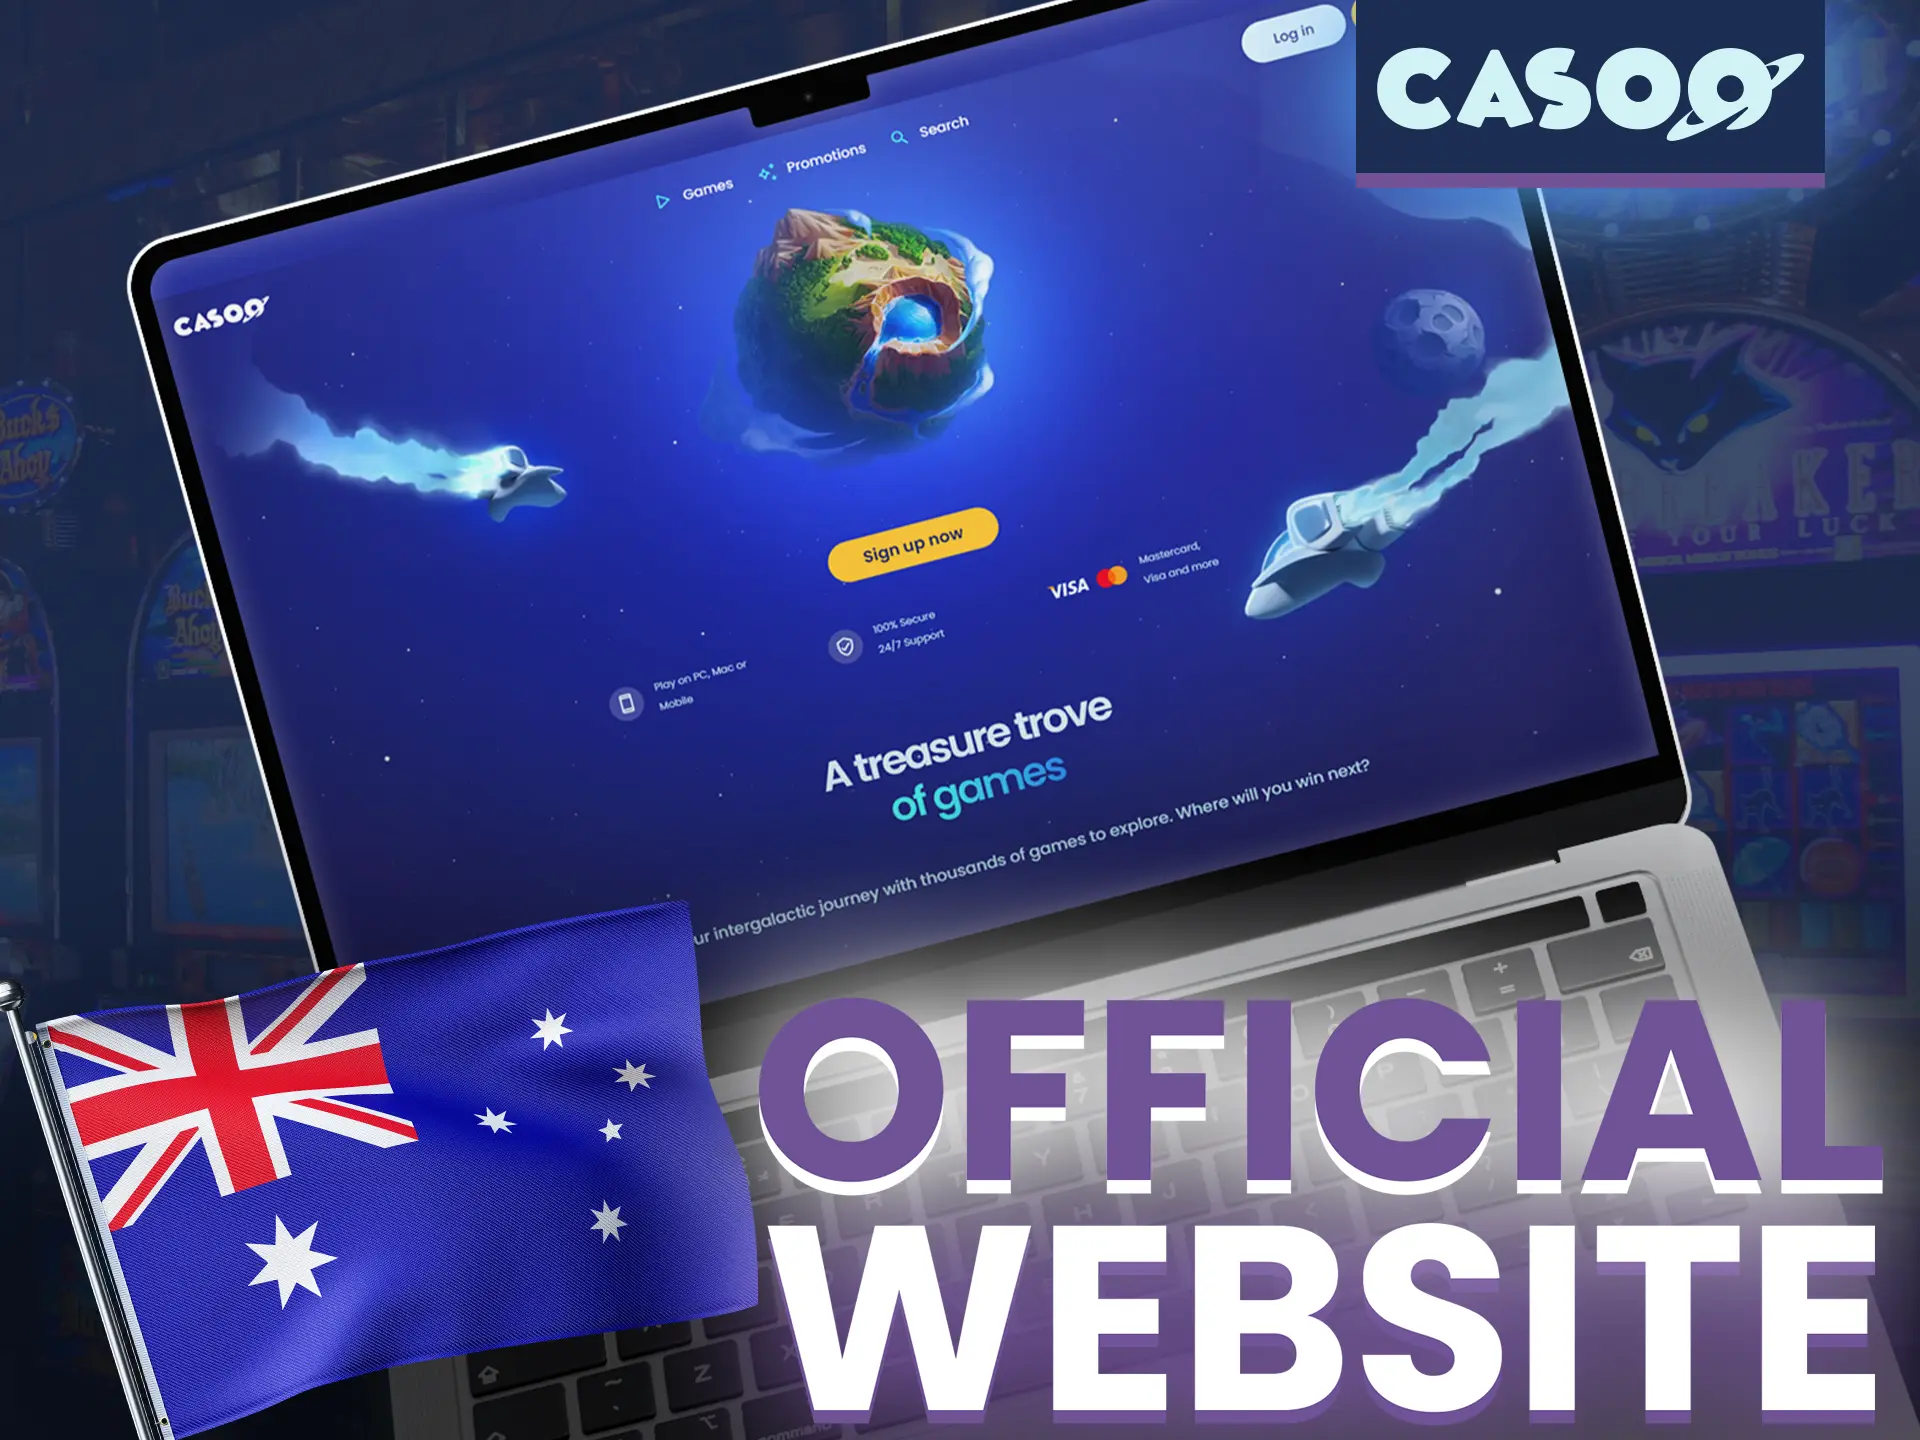 The official Casoo site adheres to the rules of fair play.